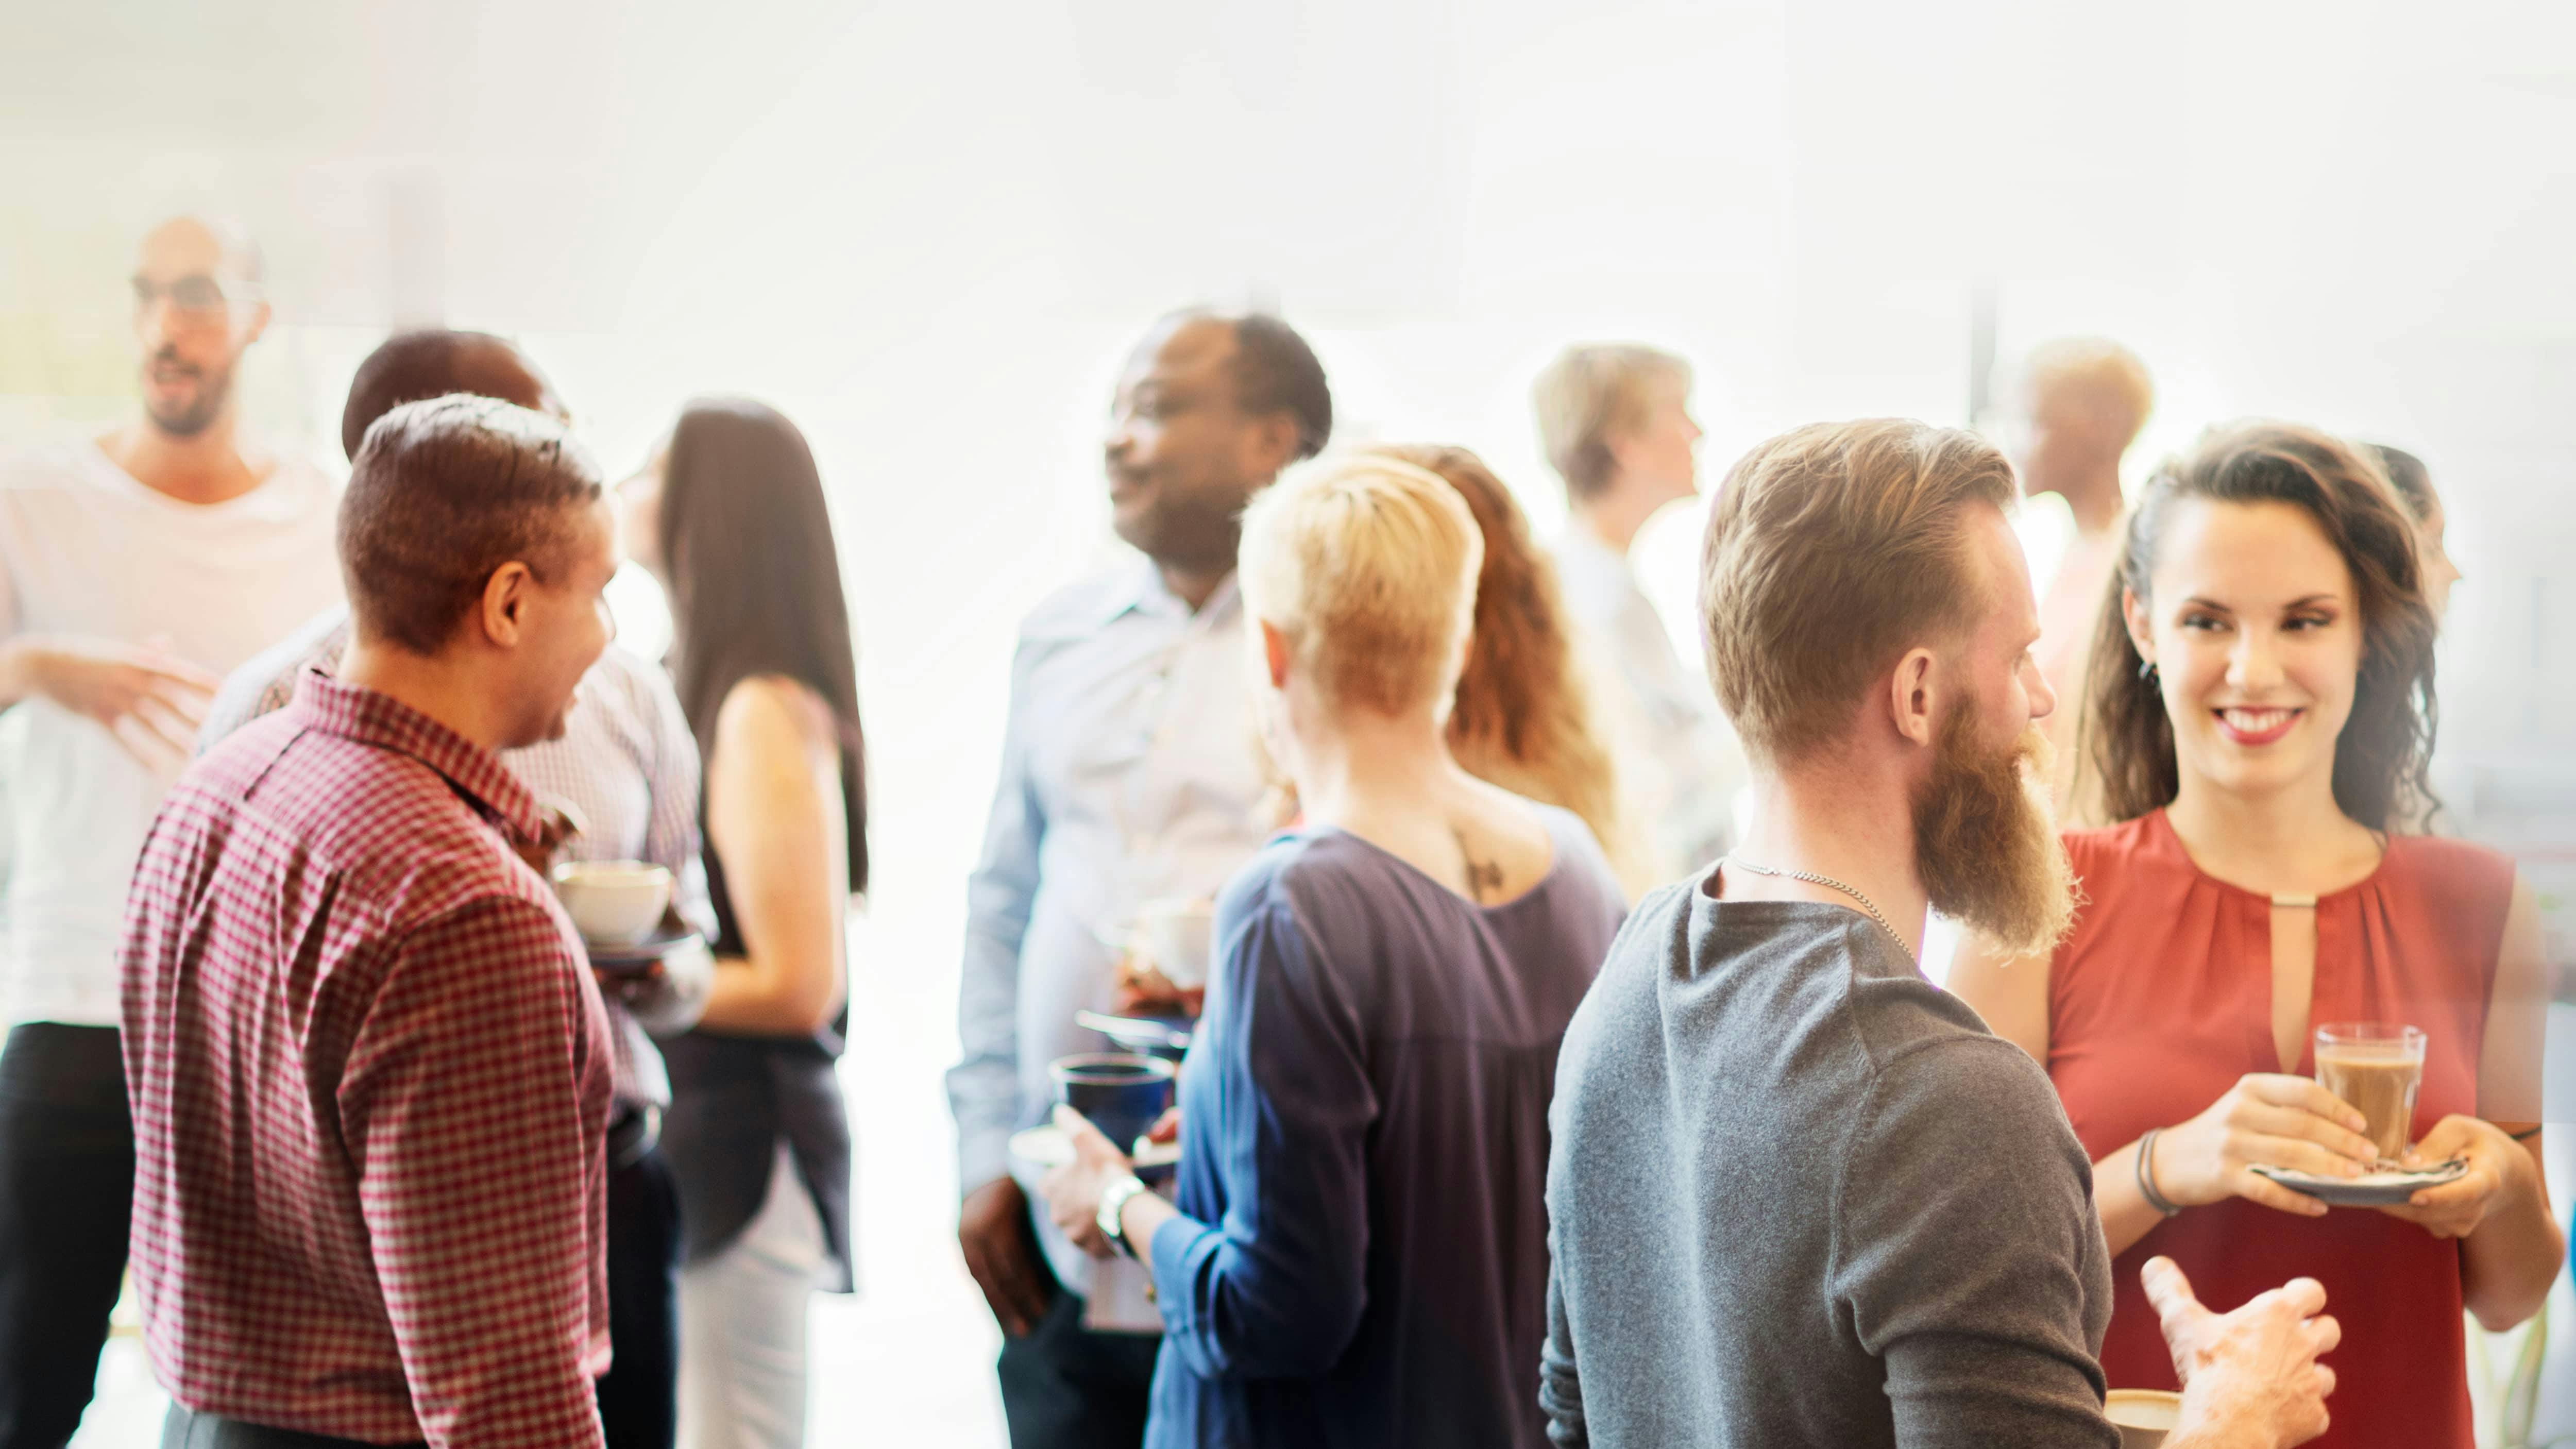 How to Host a Successful Networking Event in 7 Simple Steps